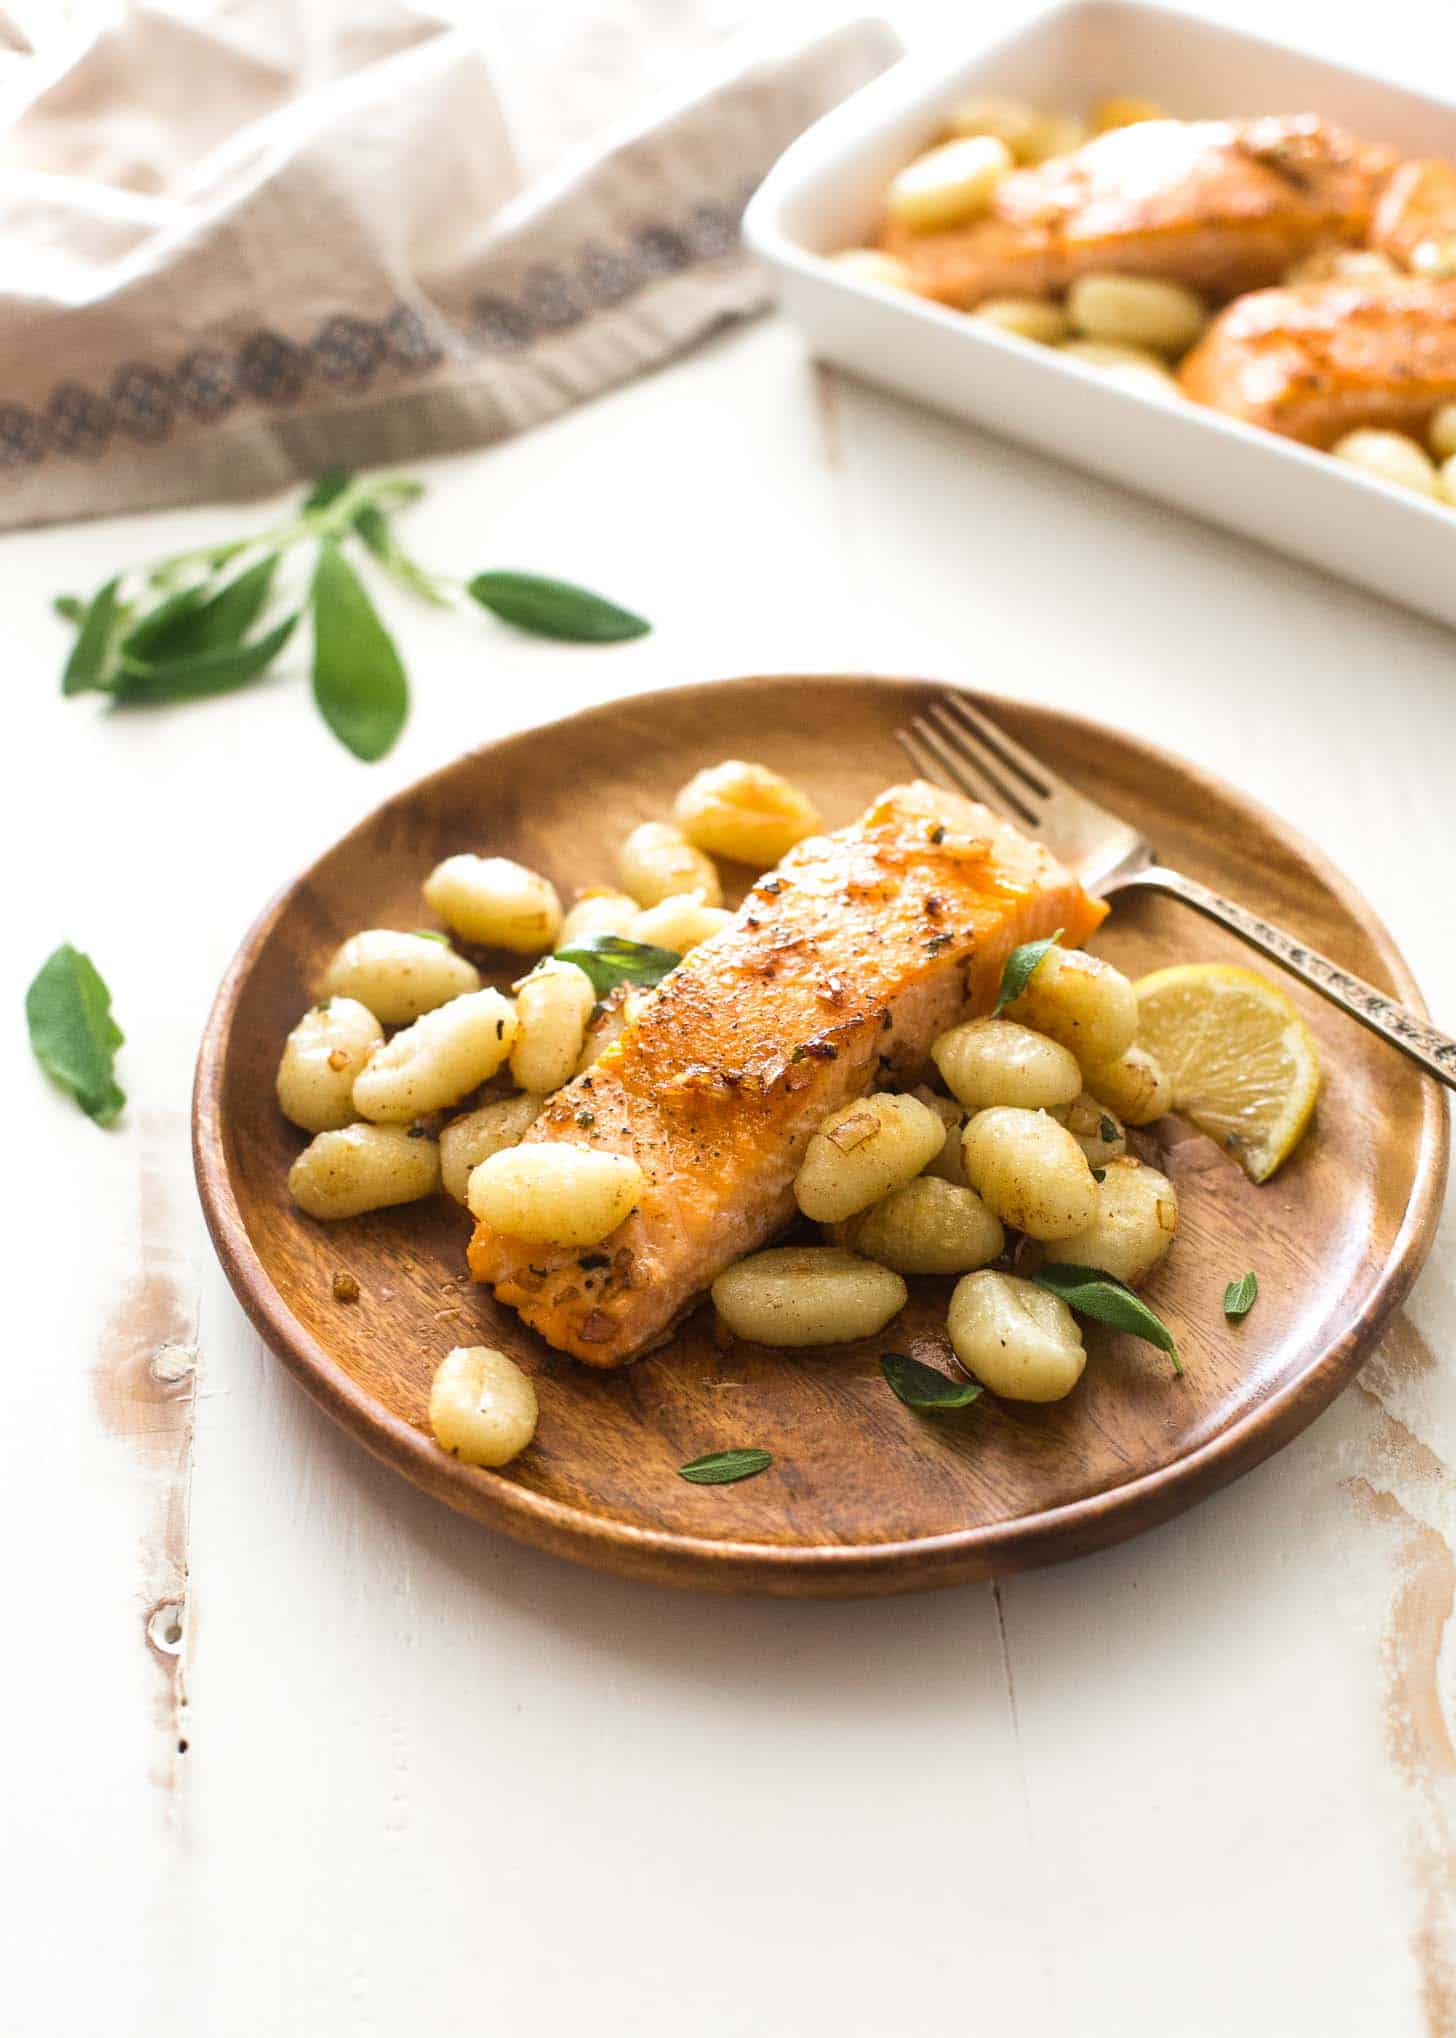 salmon and gnocchi on a wooden plate